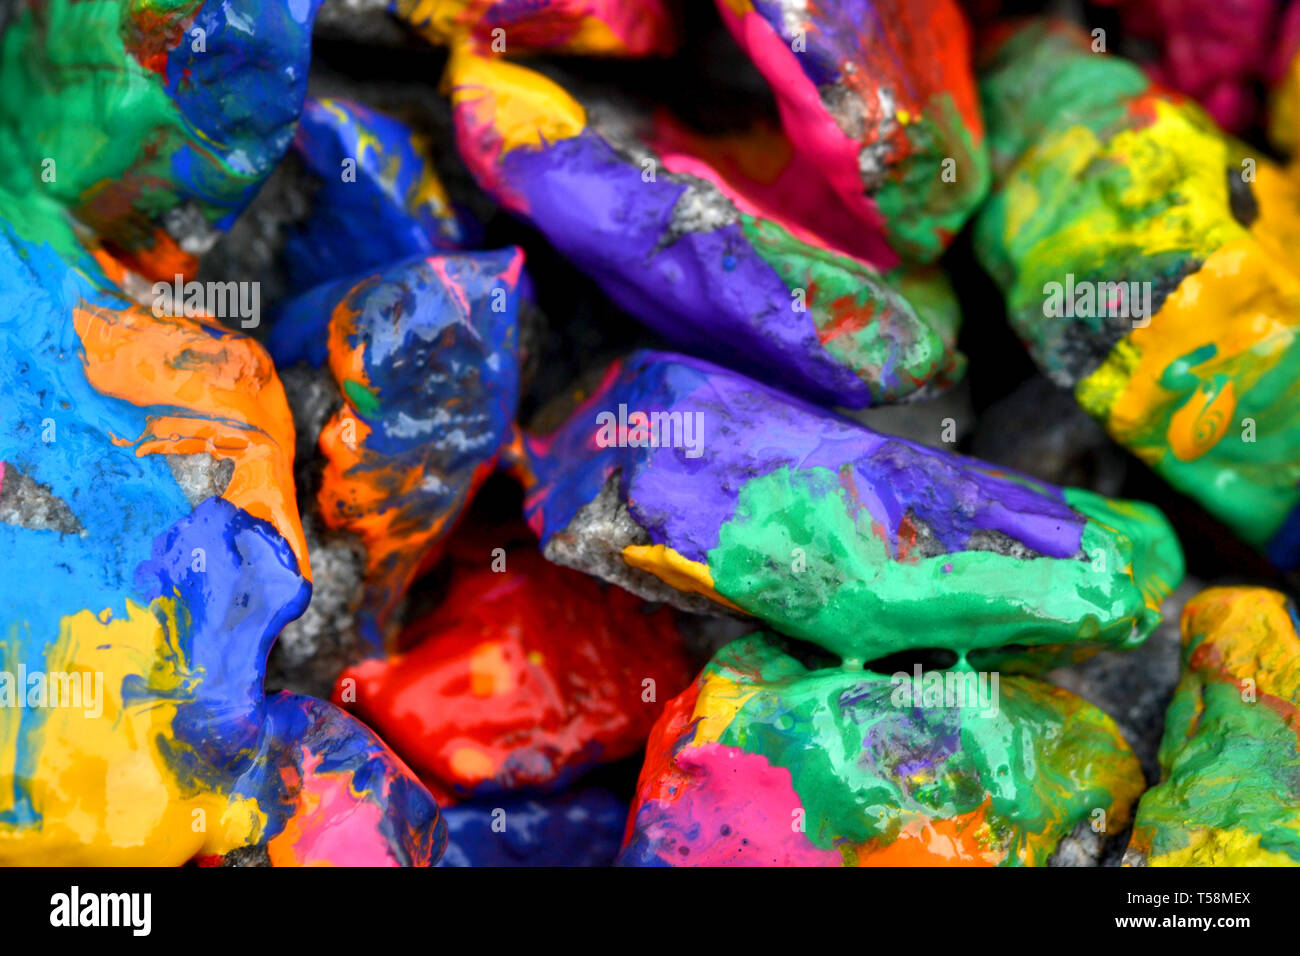 stones with colorful paint. Abstract background colored stones randomly in different colors Stock Photo